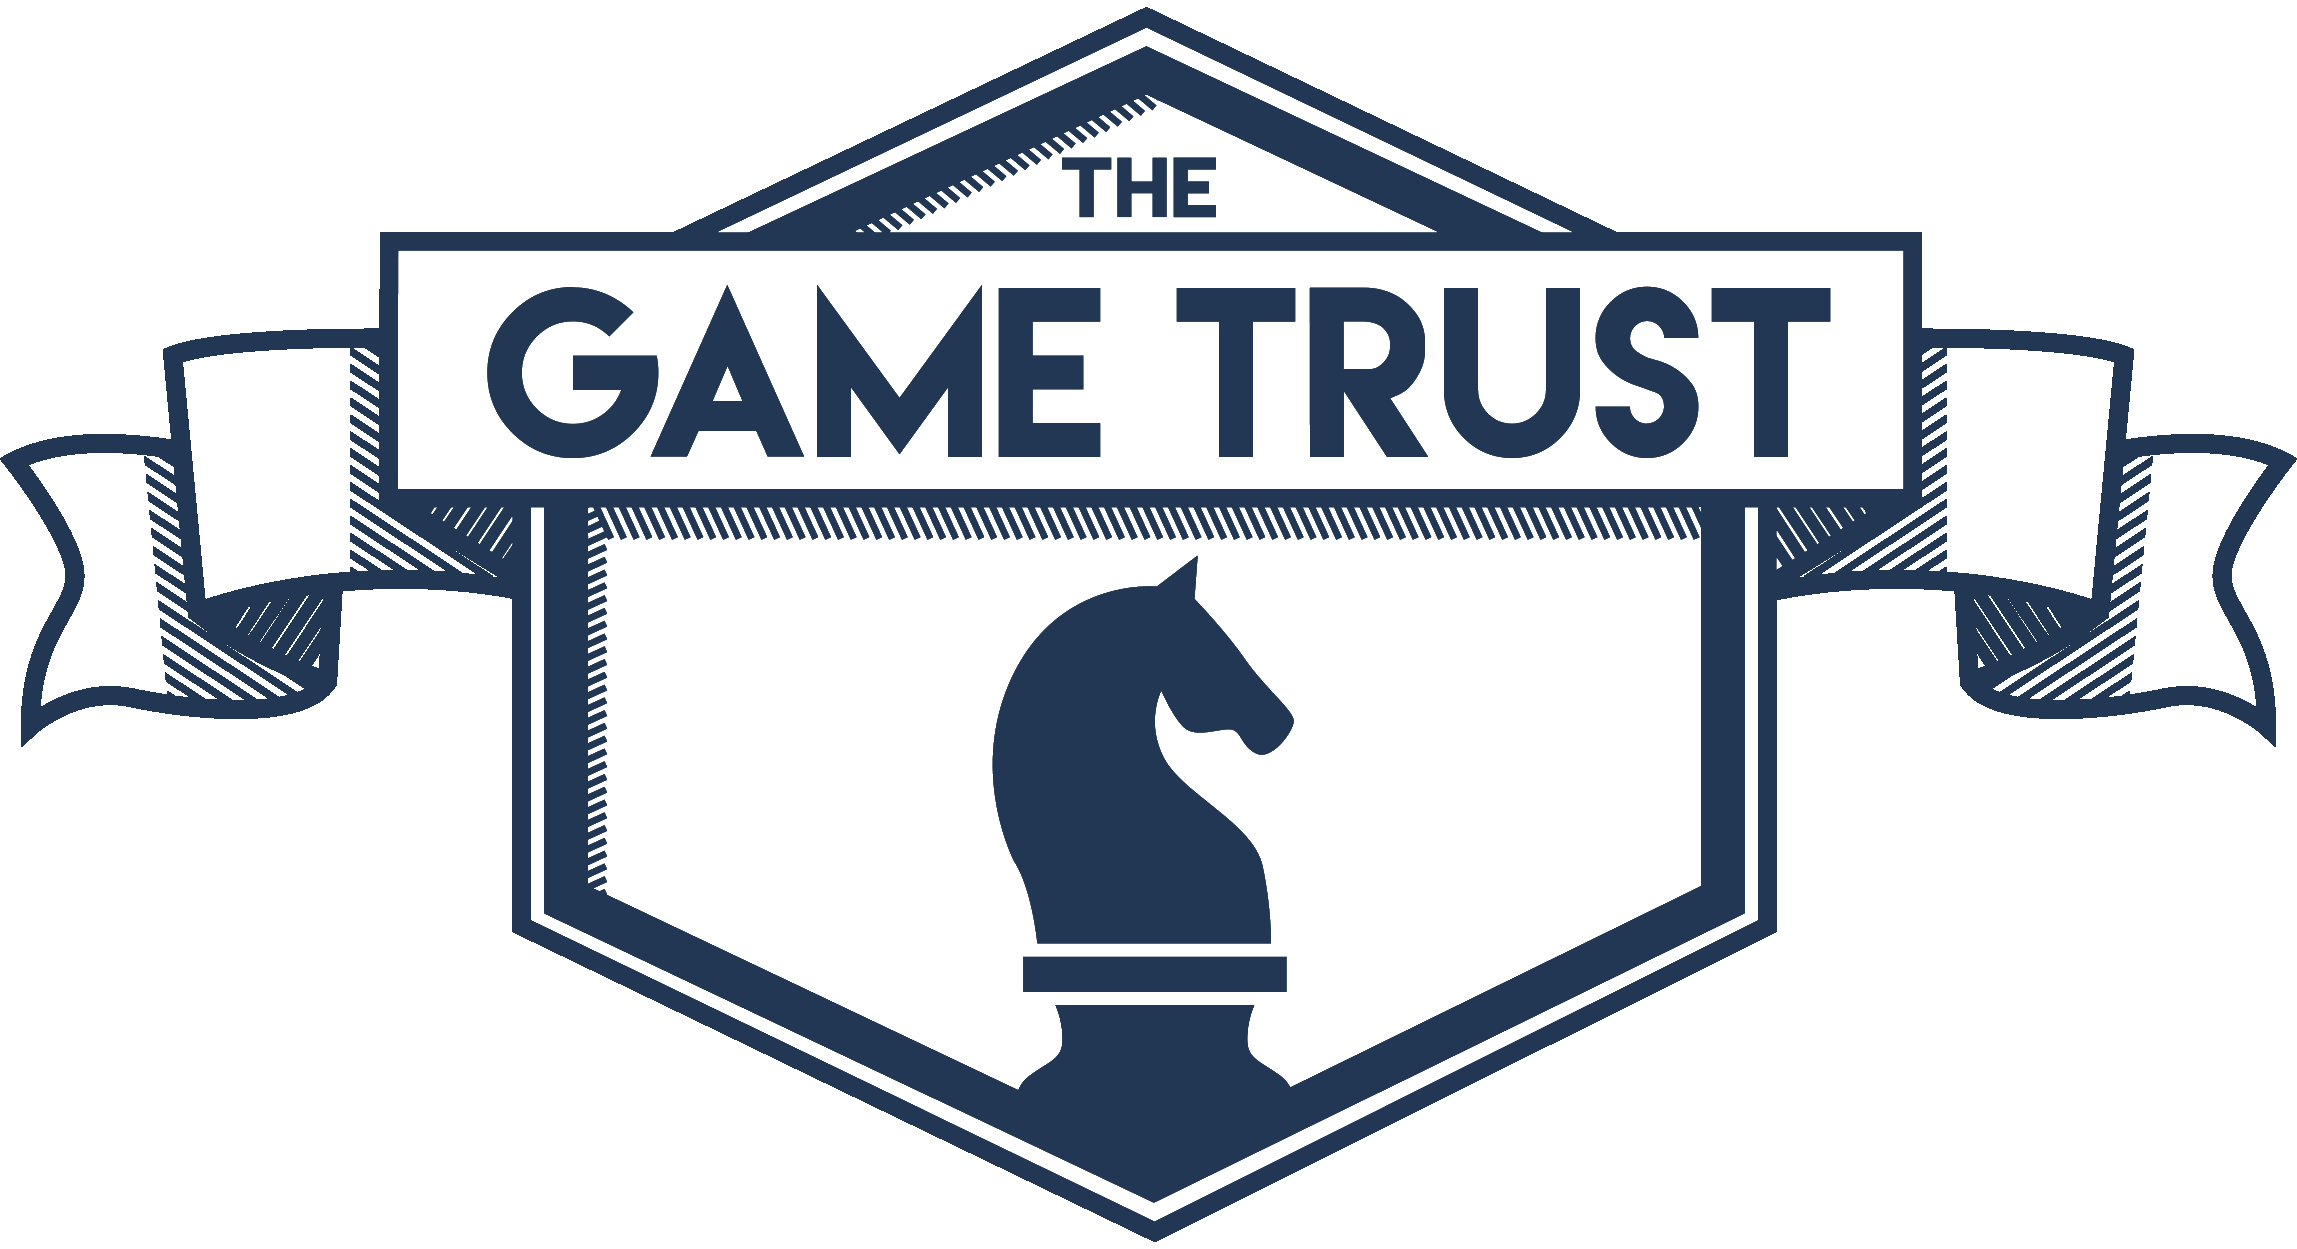 The Game Trust